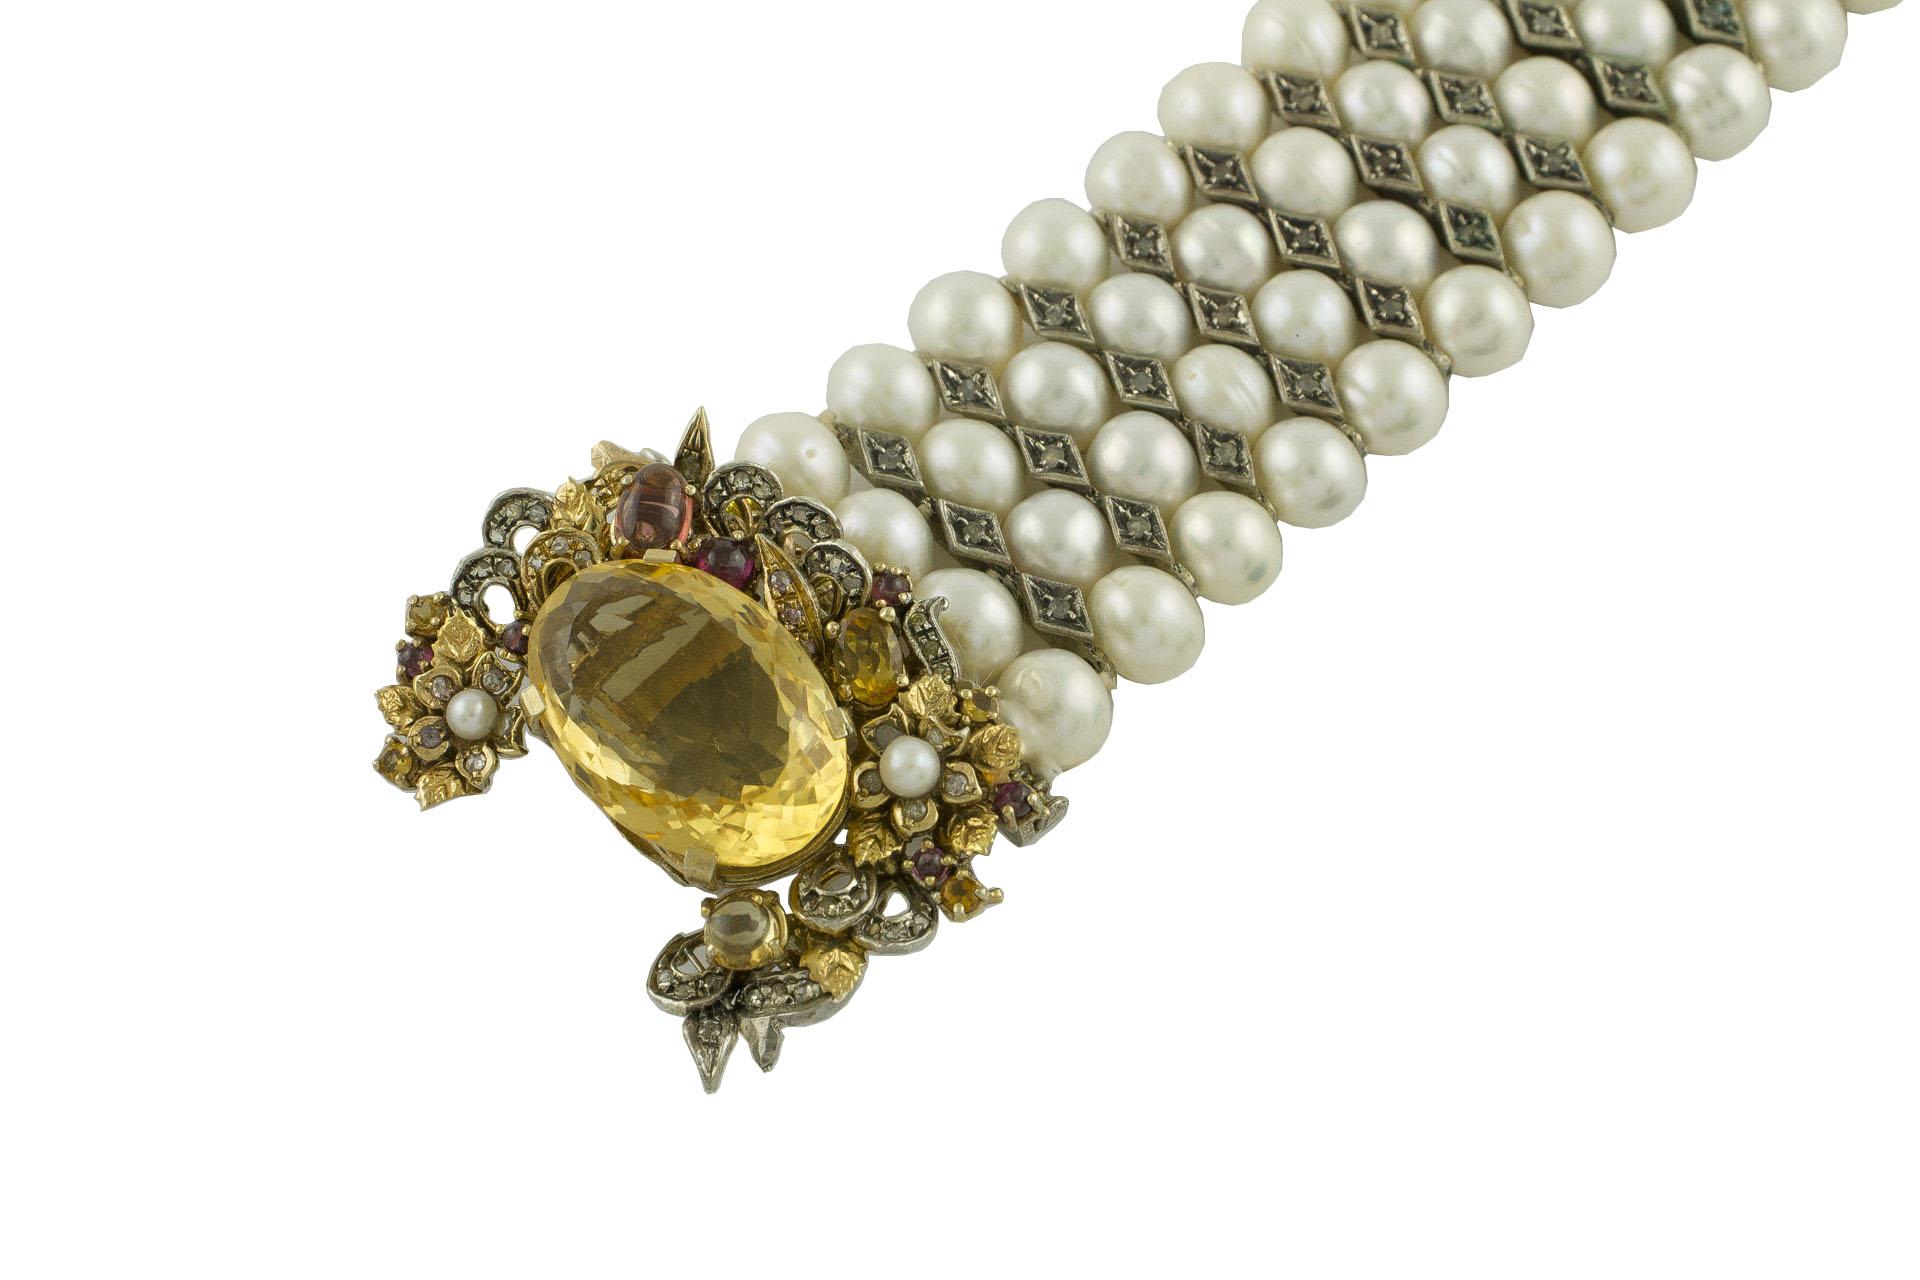 Amazing Beaded bracelet composed of 4 glossy white pearls rows with rose cut diamonds rows in the middle, adorned with gorgeous closure in 9K rose gold and silver composed by big yellow topaz in the center and embellished all around by flowers and